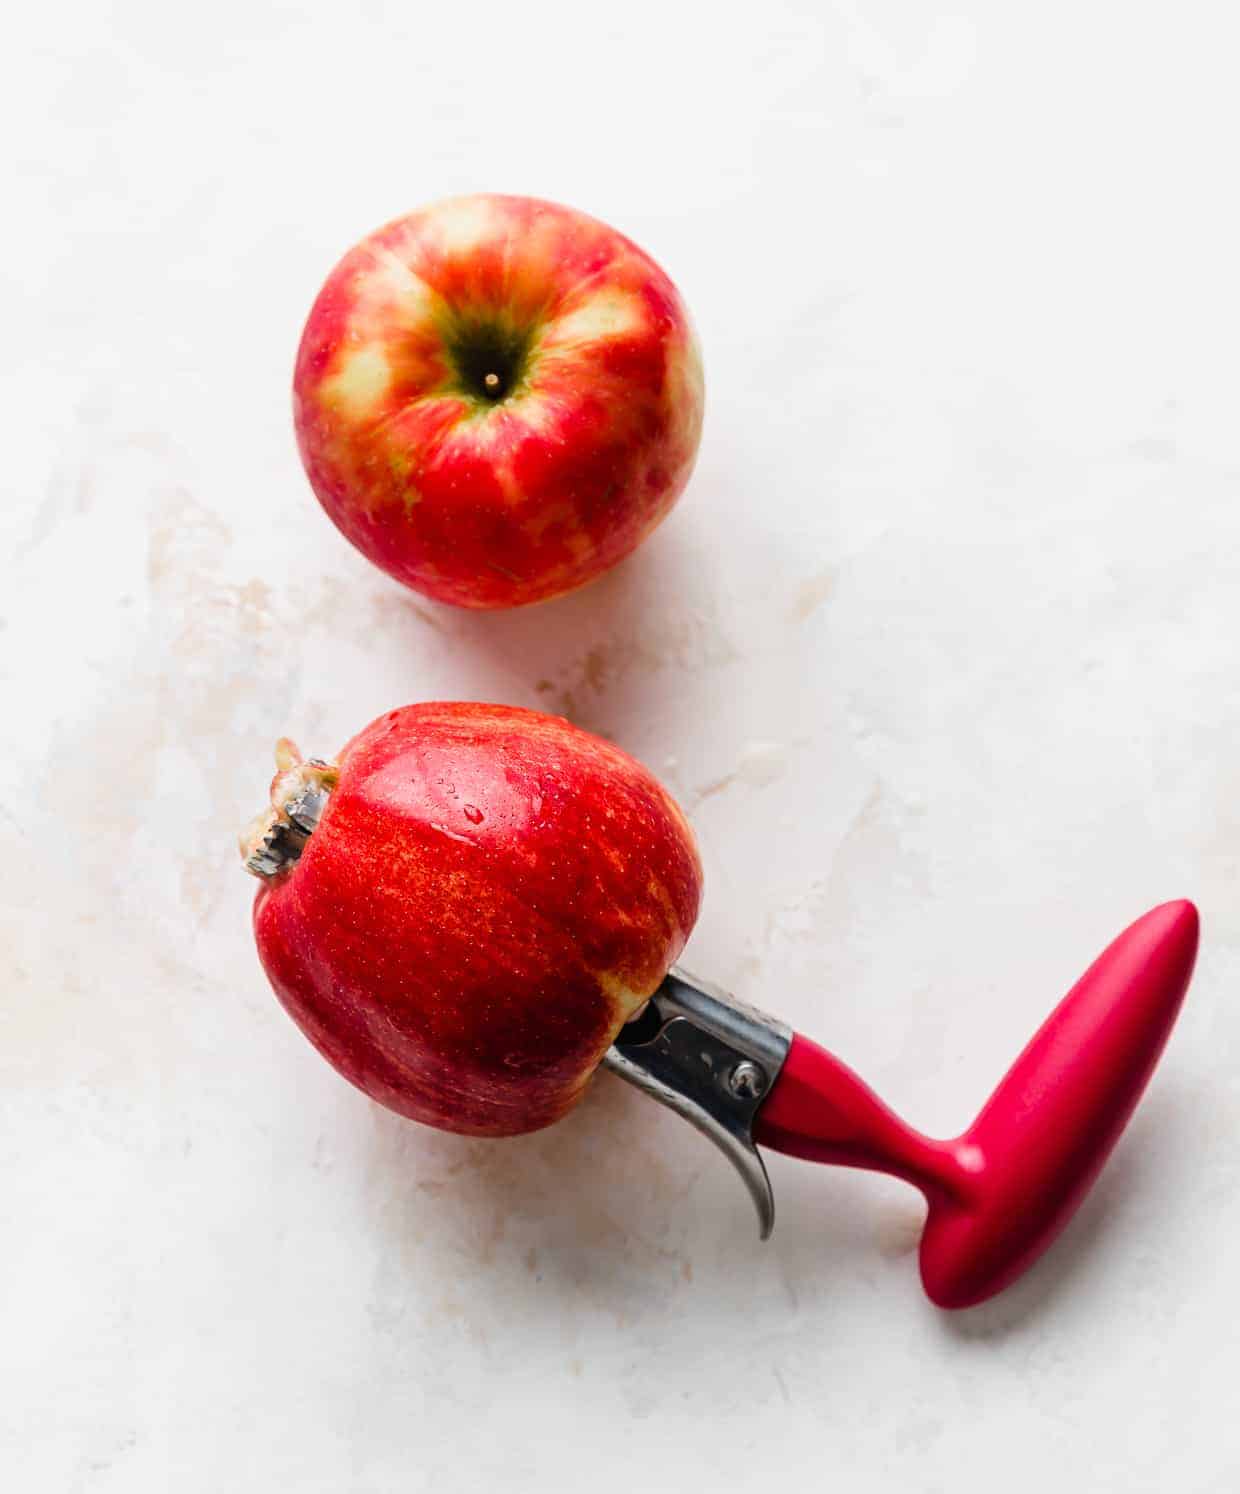 An apple corer removing the core from a red apple.